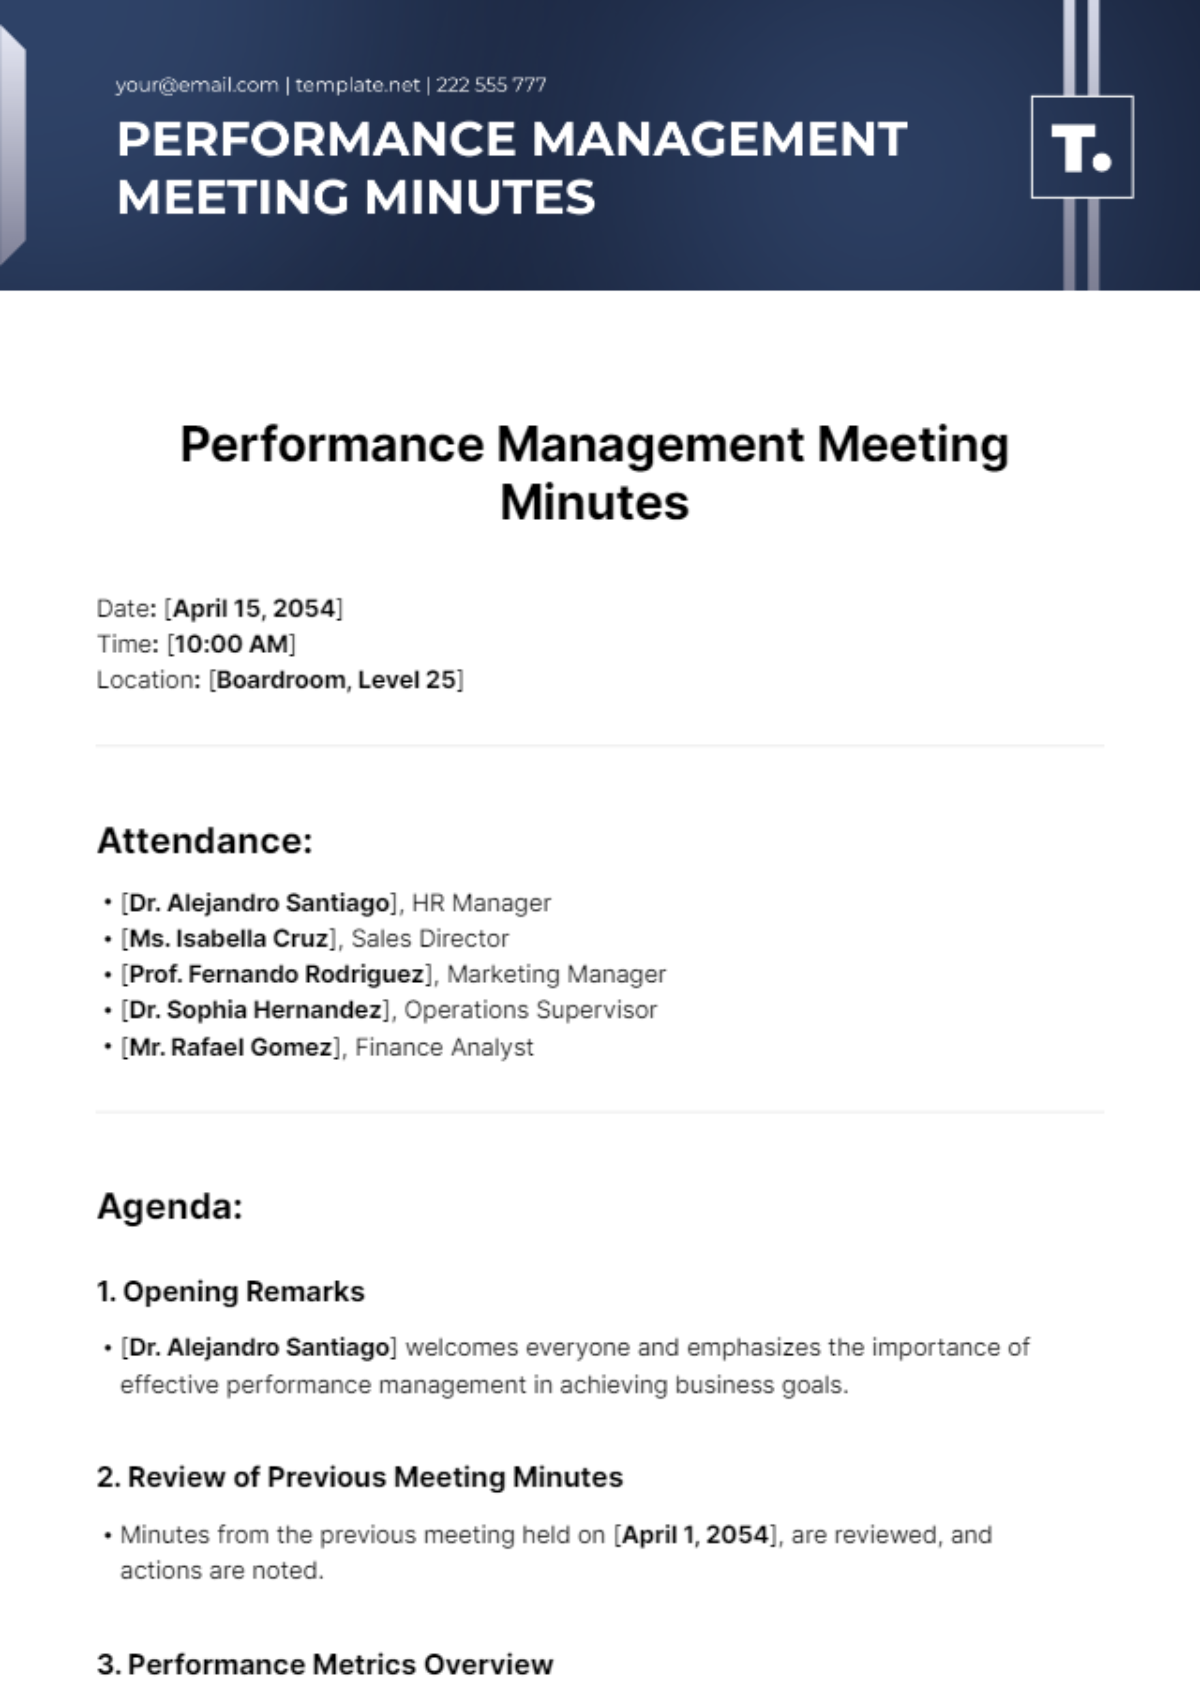 Performance Management Meeting Minutes Template